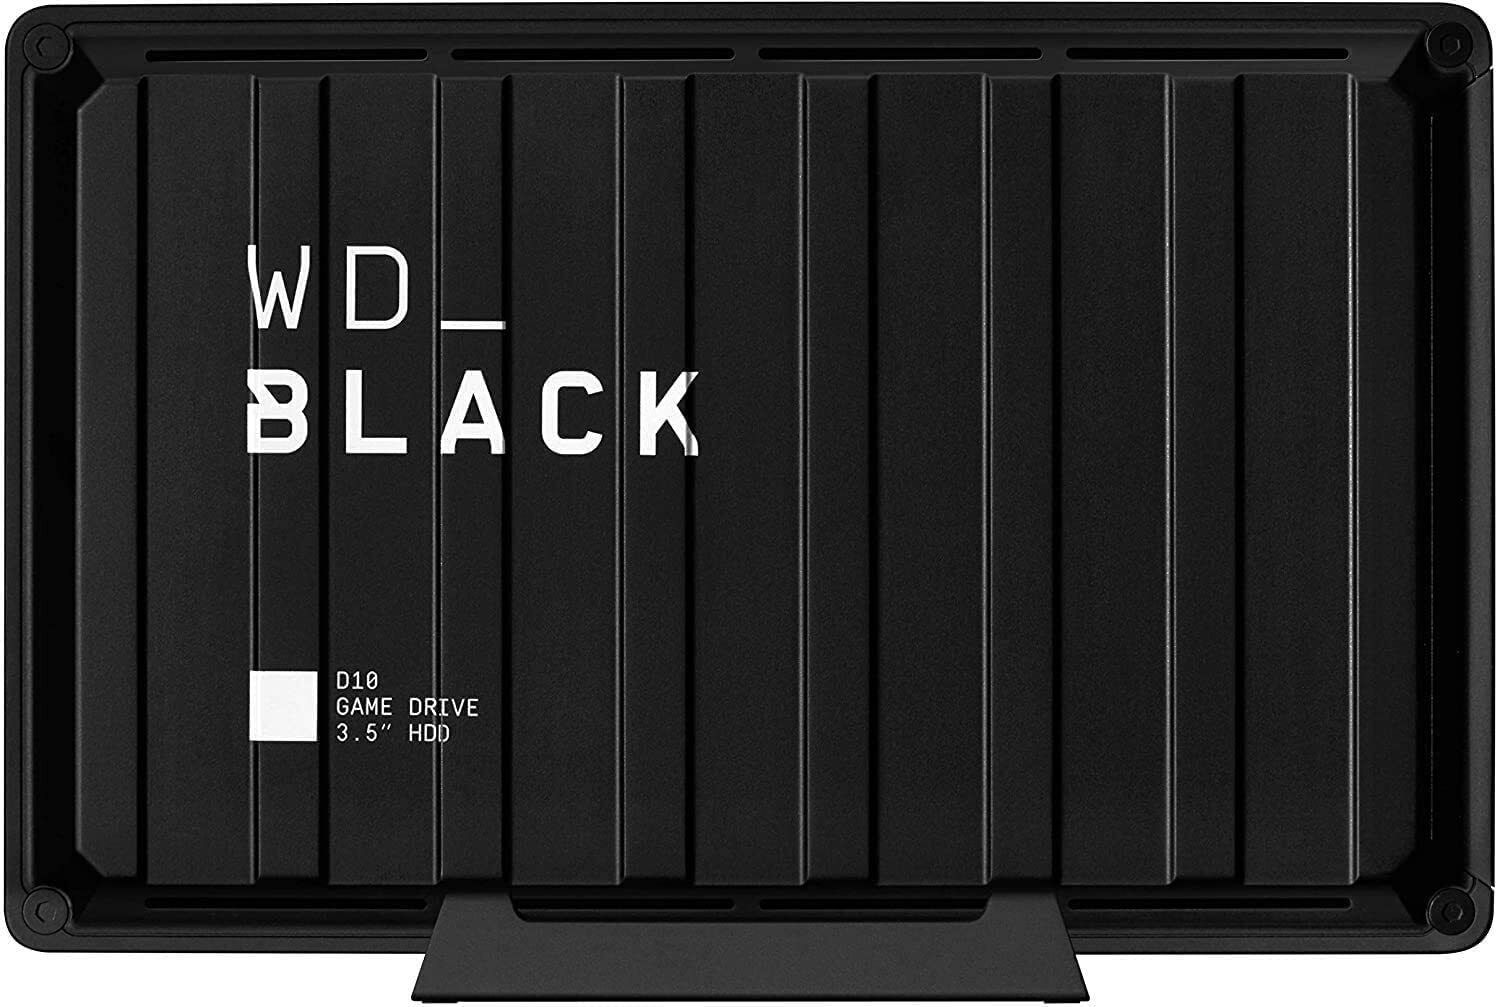 WDBLACK D10 8TB Game Drive 7200RPM With Active Cooling To Store Your Massive Gam